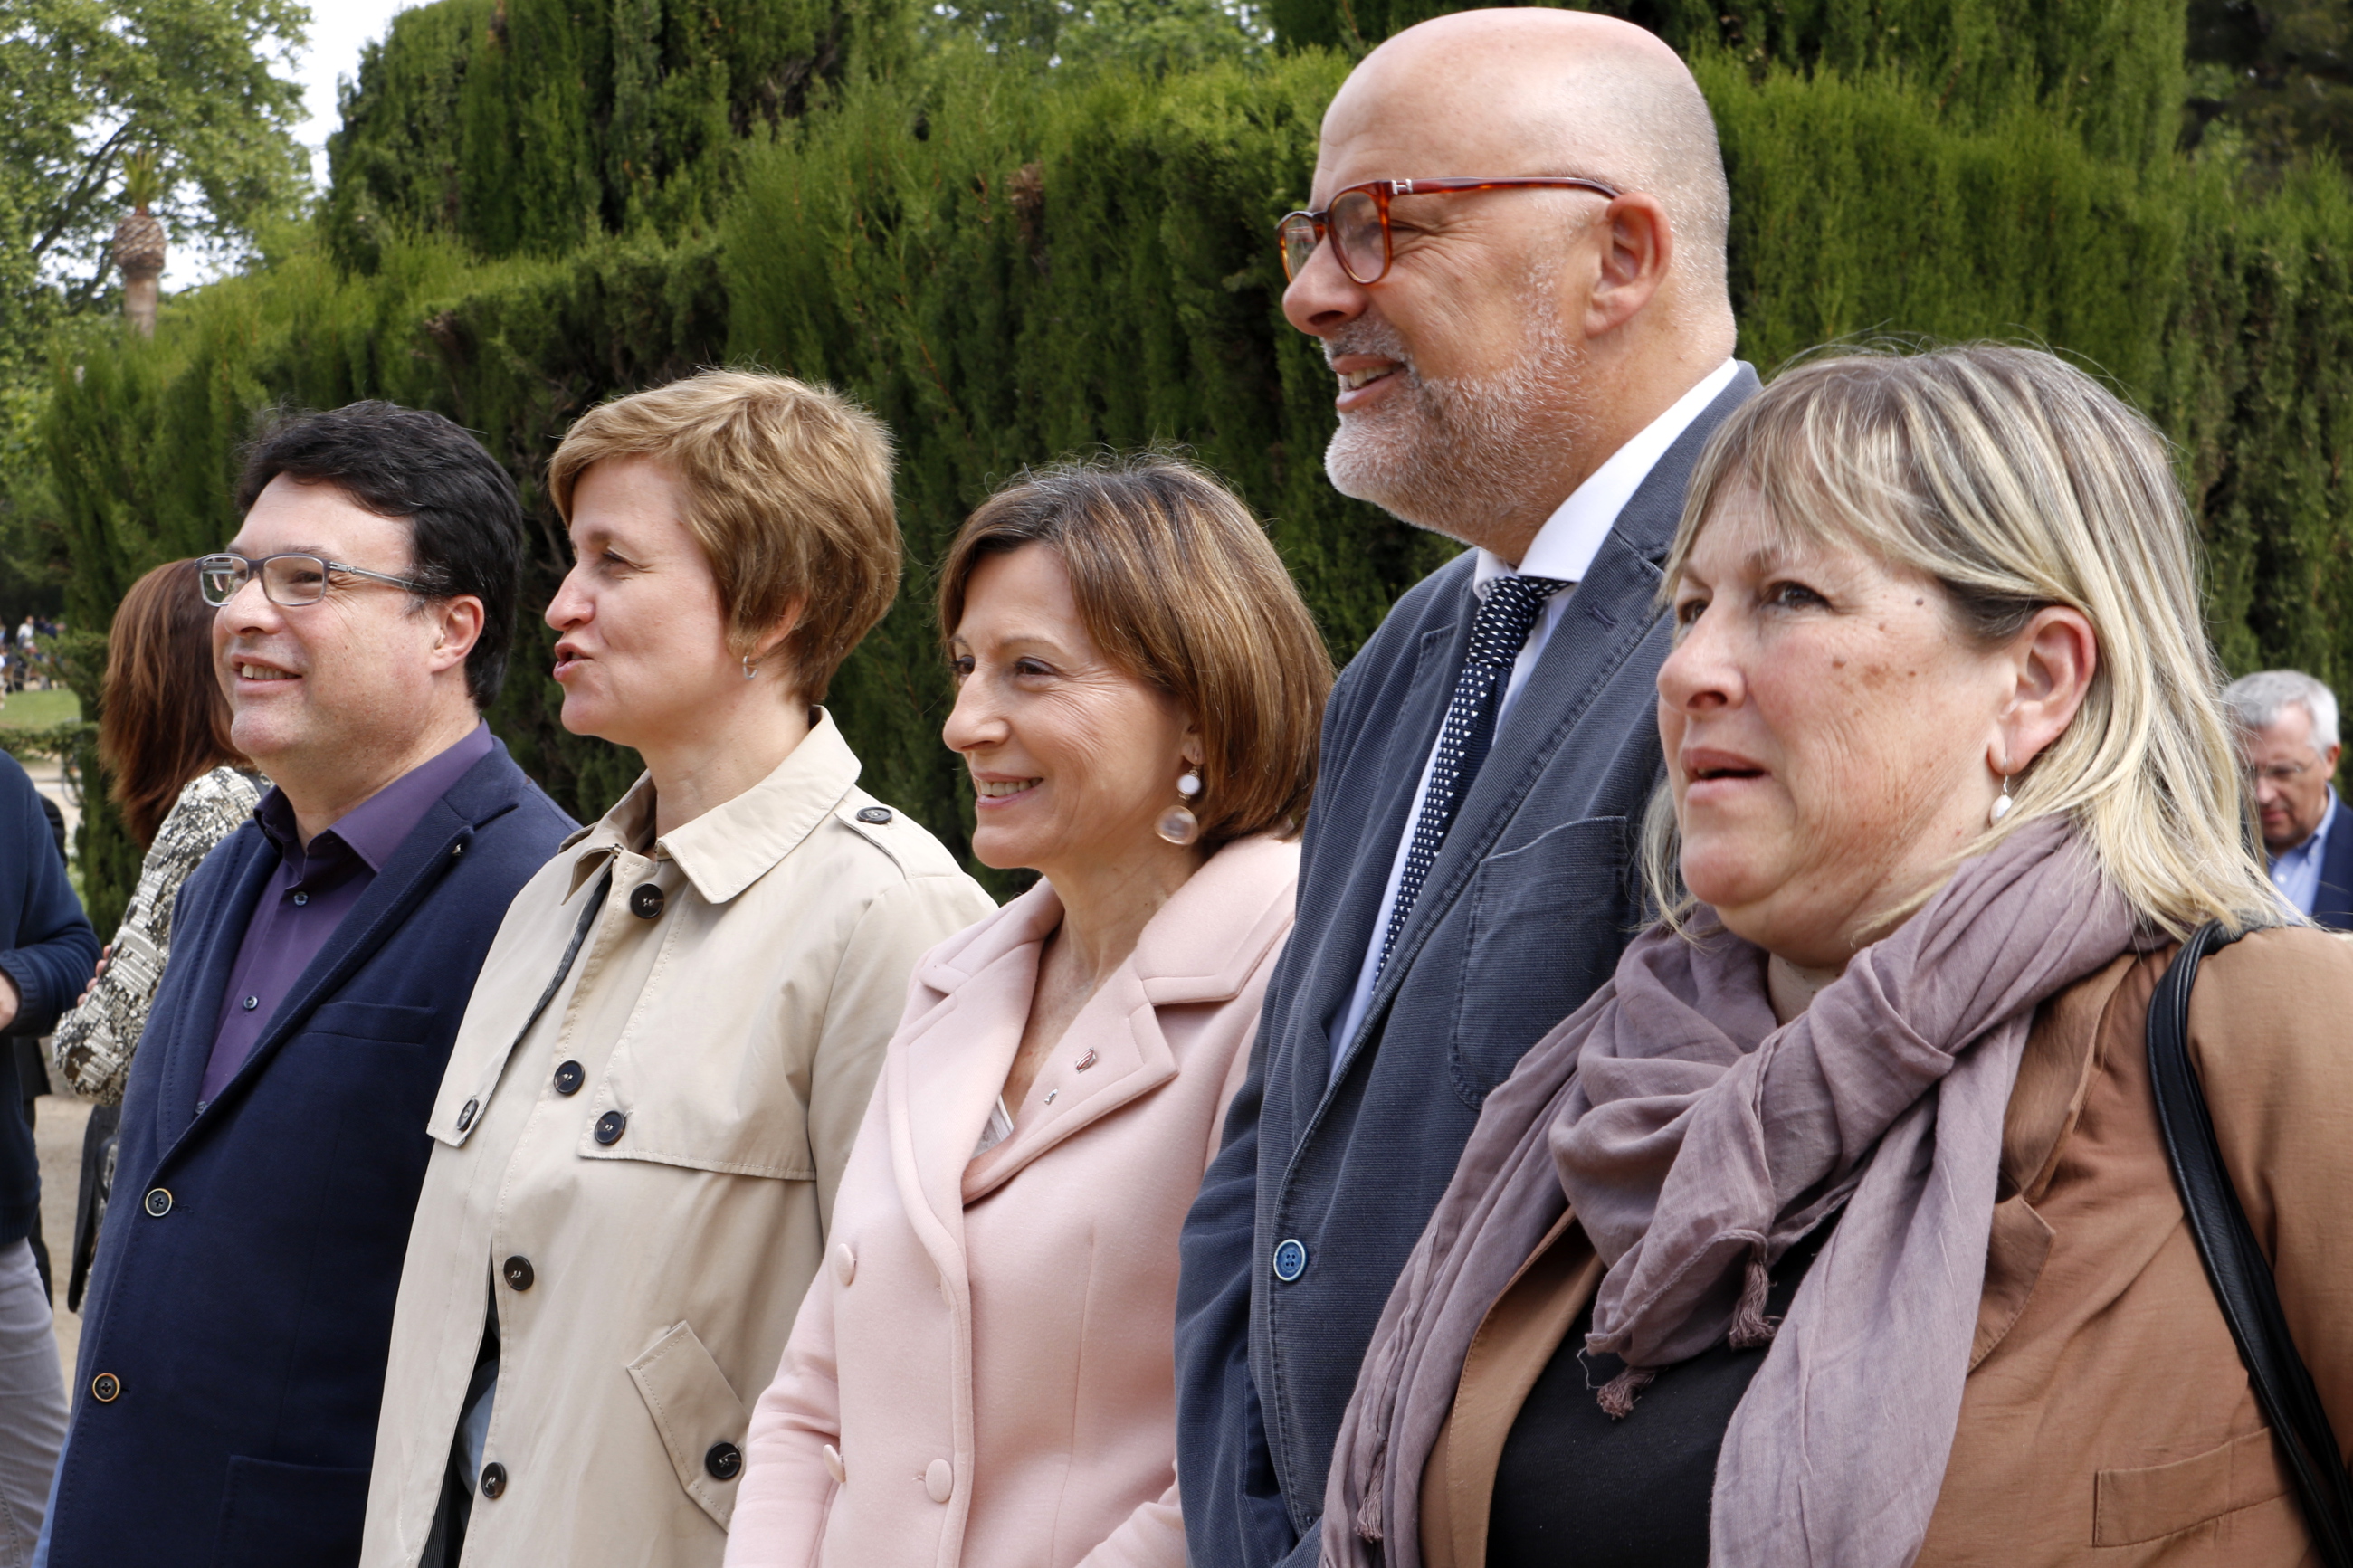 The former members of the Catalan parliament bureau, with speaker Carme Forcadell in the center (by Rafa Garrido)